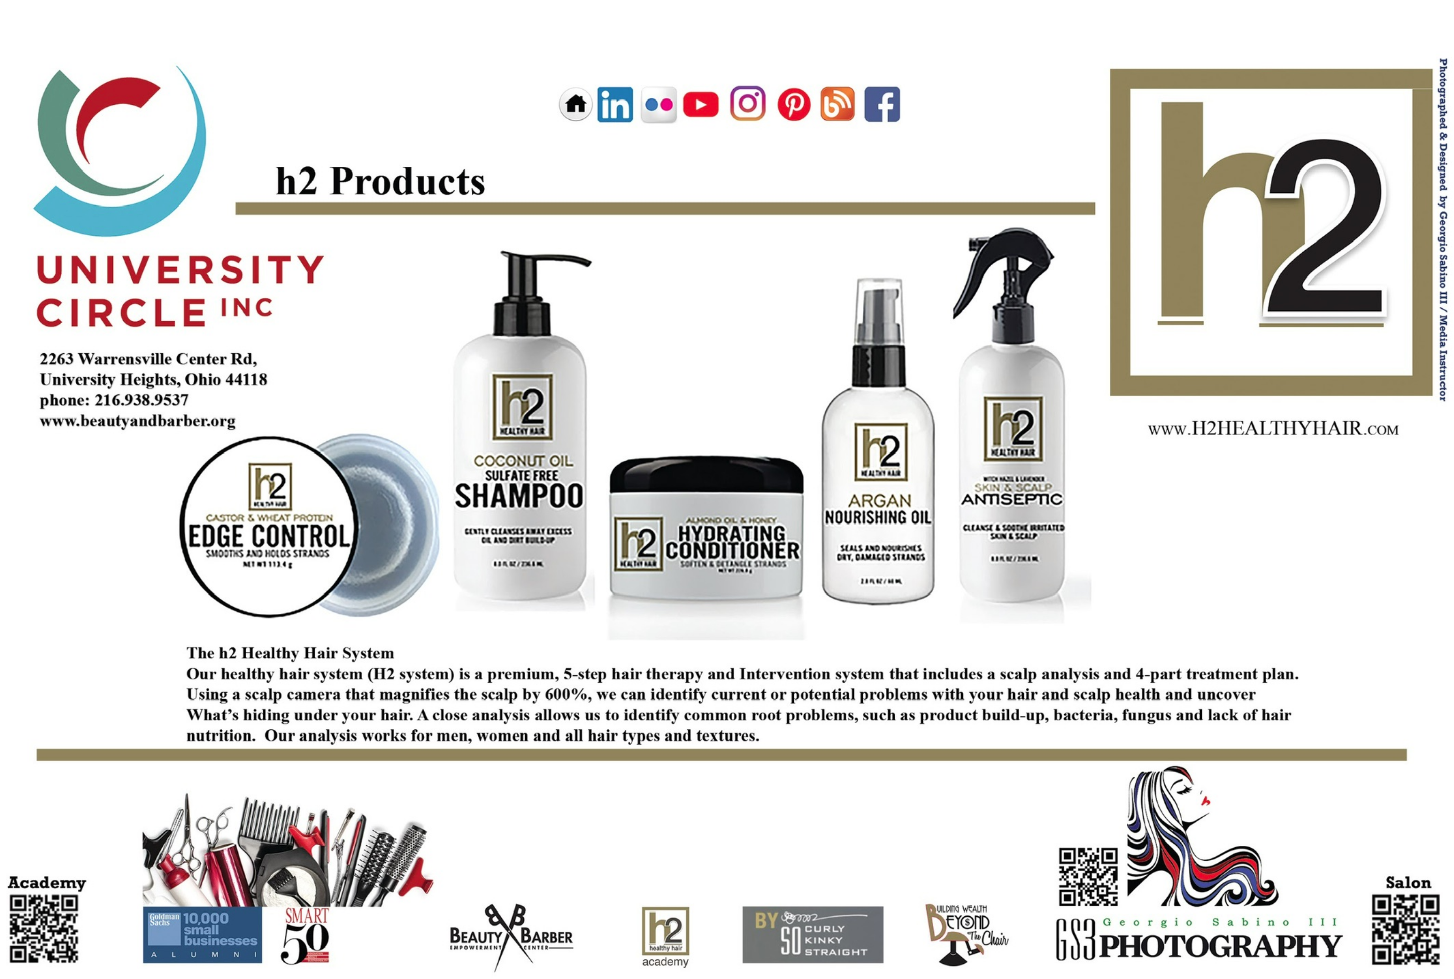 H2 Products